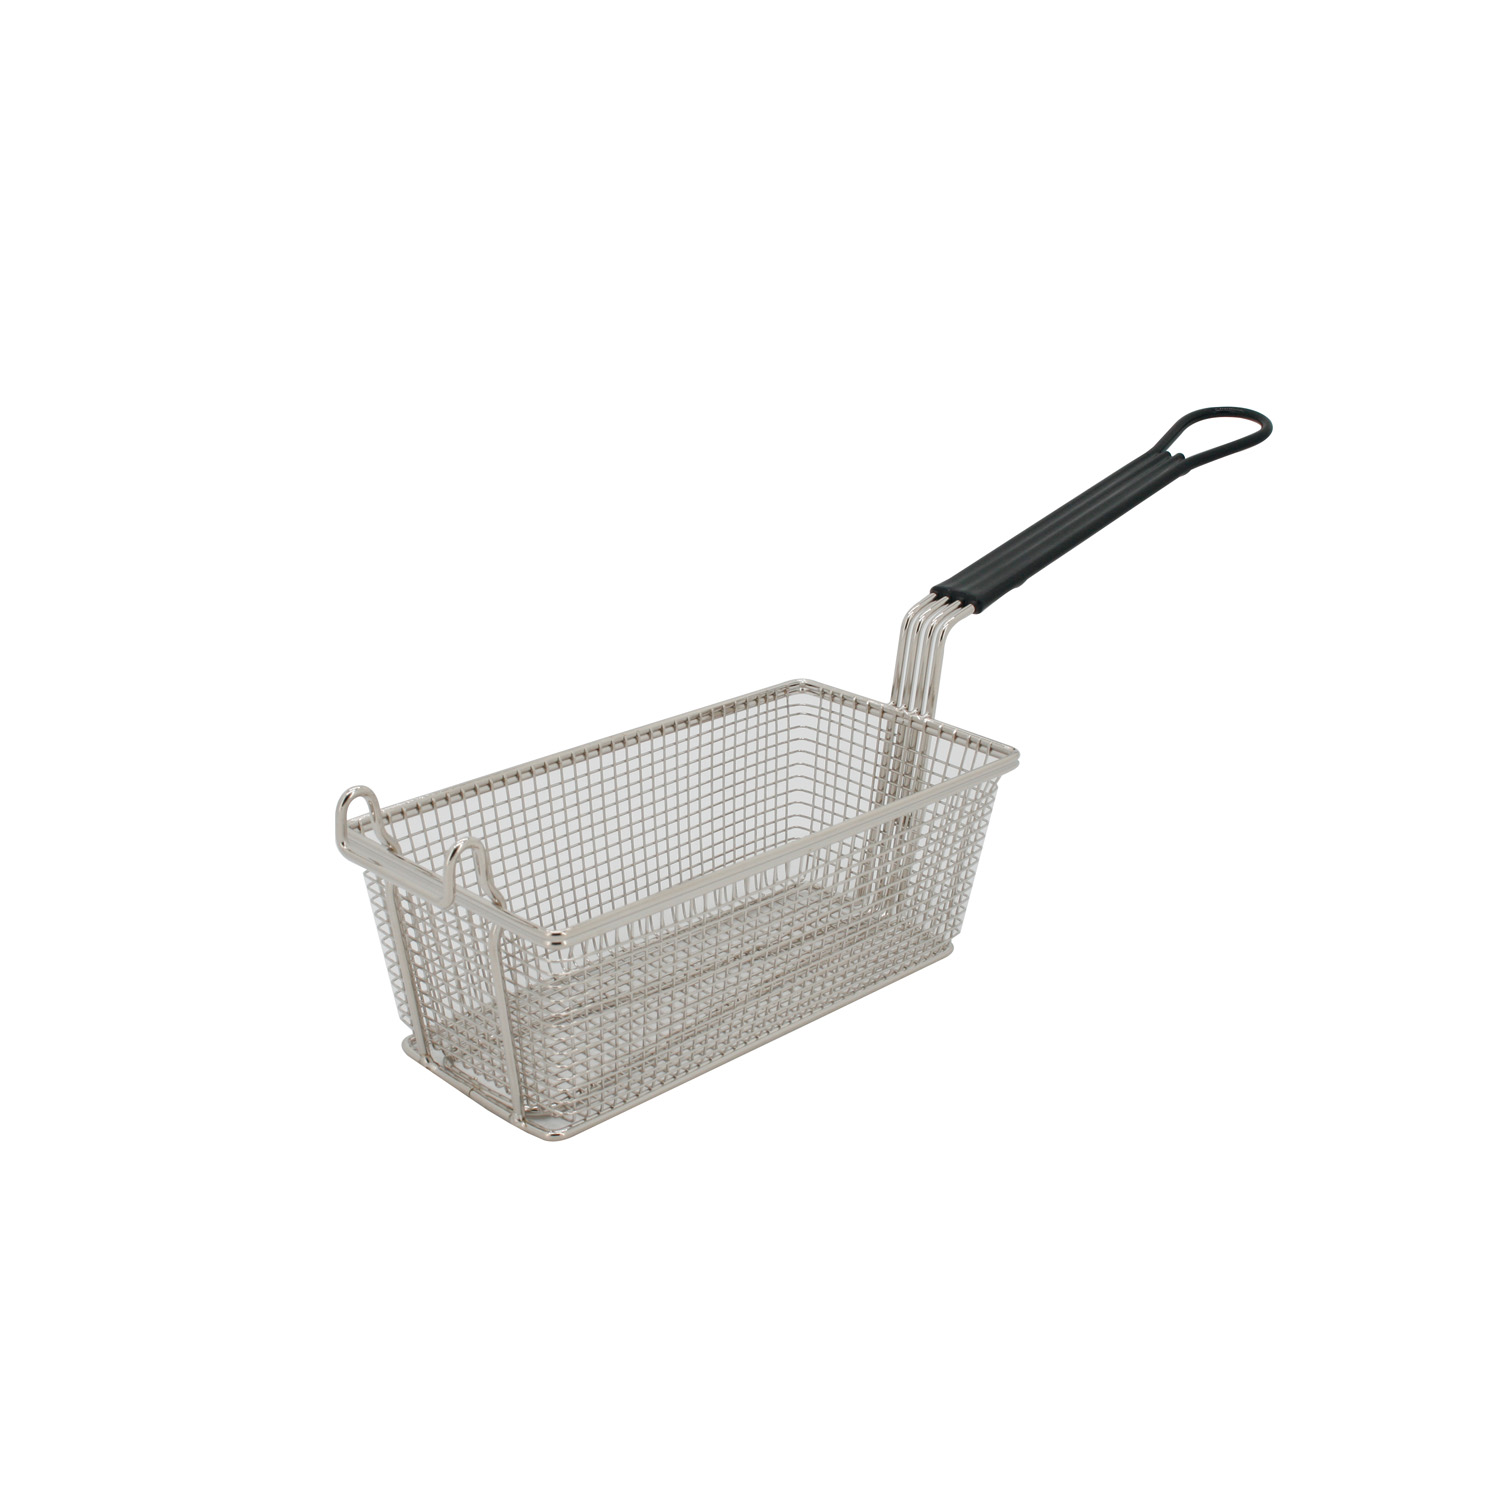 CAC China SPFB-1 Nickel-Plated Fry Basket with Black Handle 11" x 5-3/4" x 4-3/8"